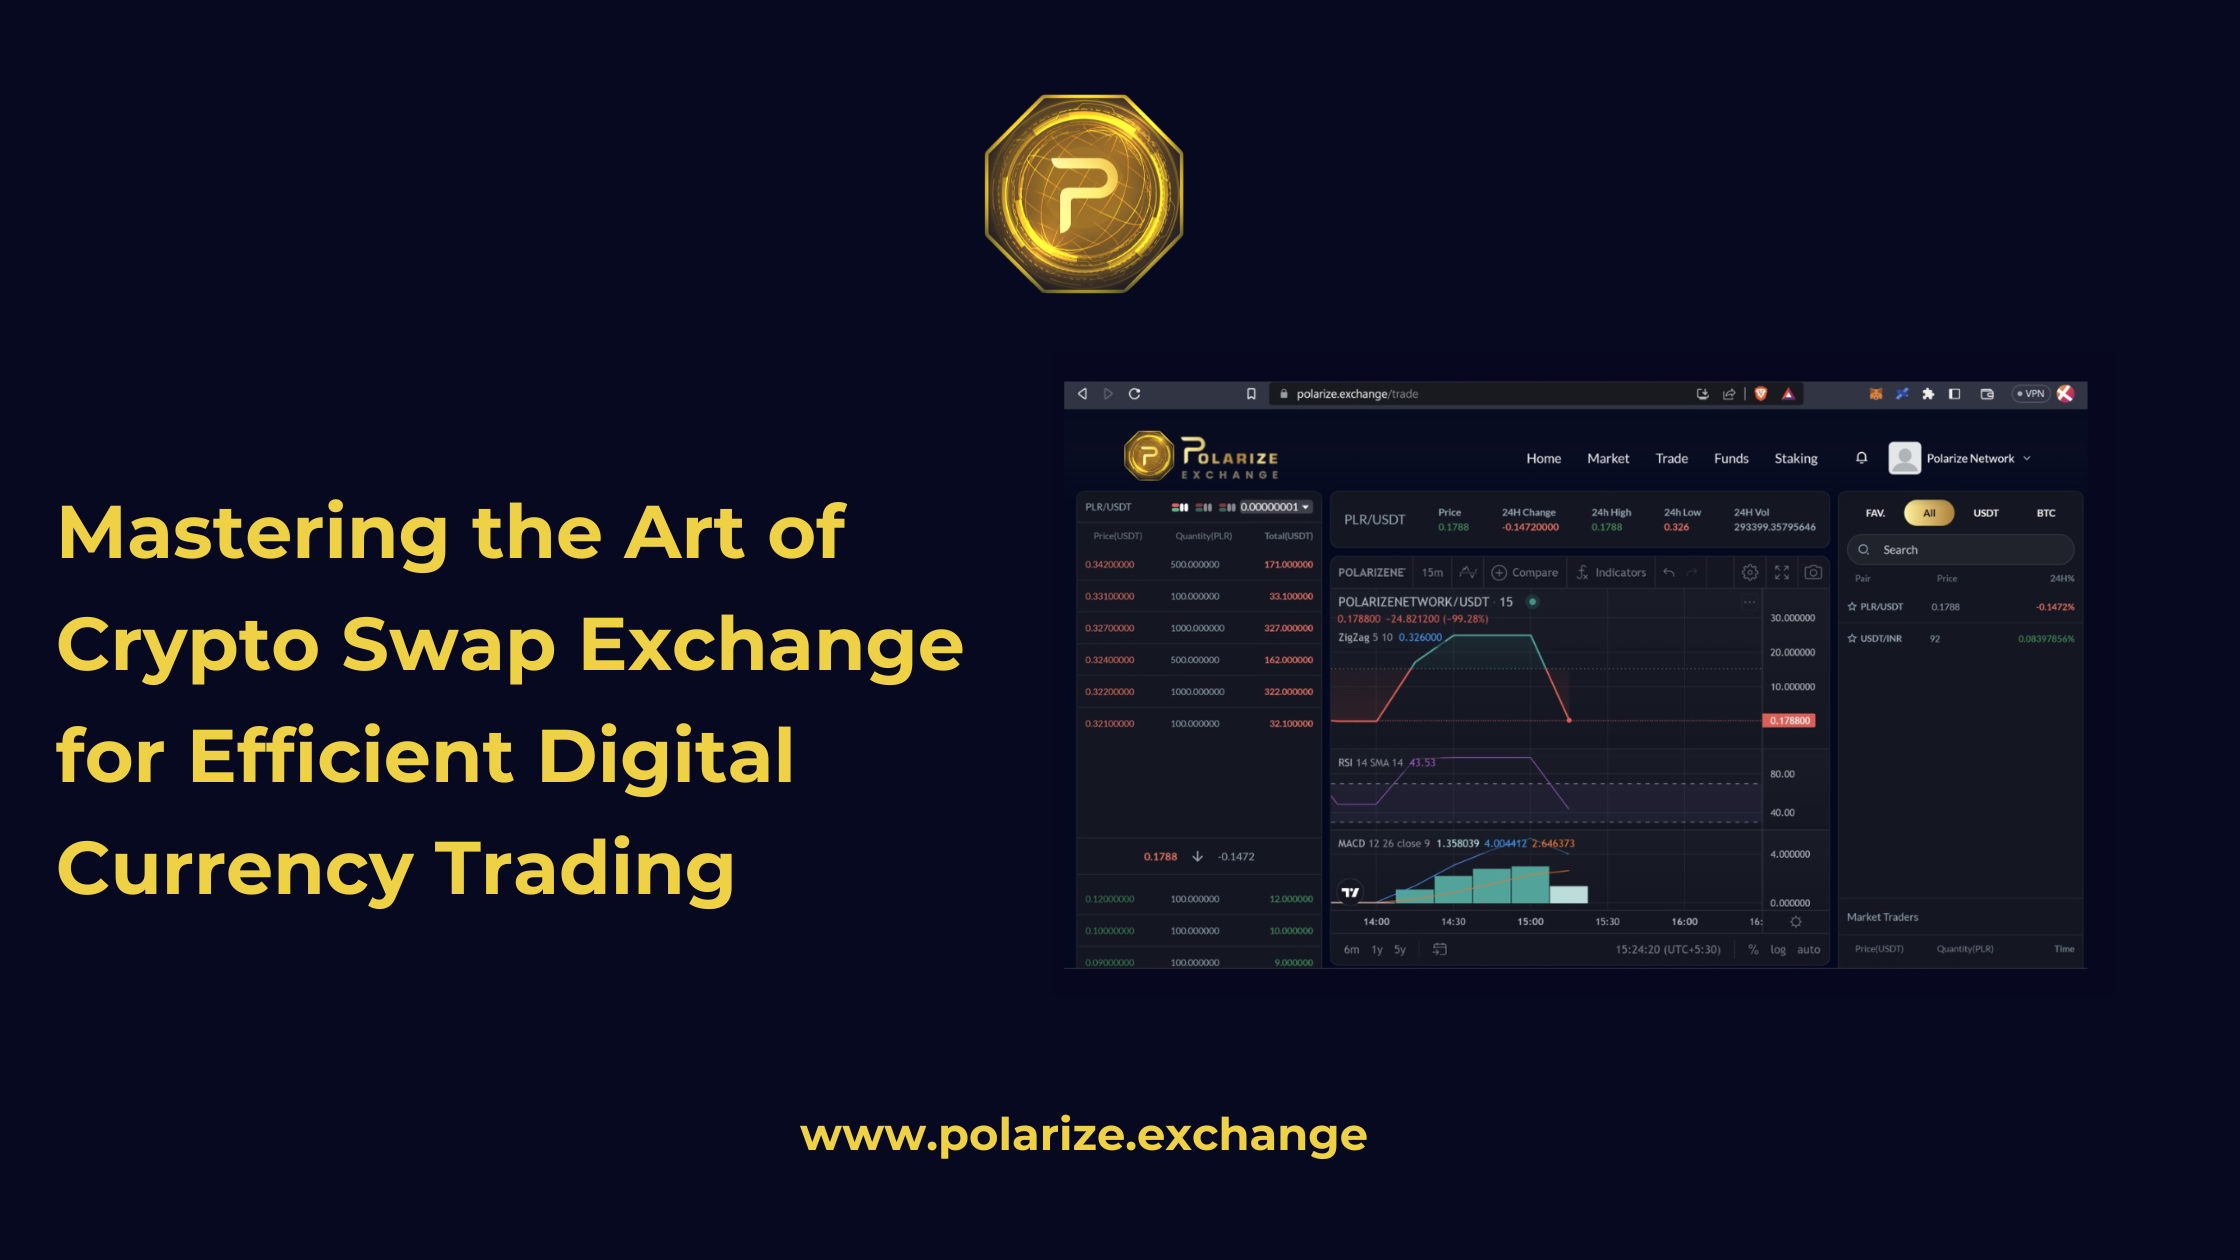 Mastering the Art of Crypto Swap Exchange for Efficient Digital Currency Trading